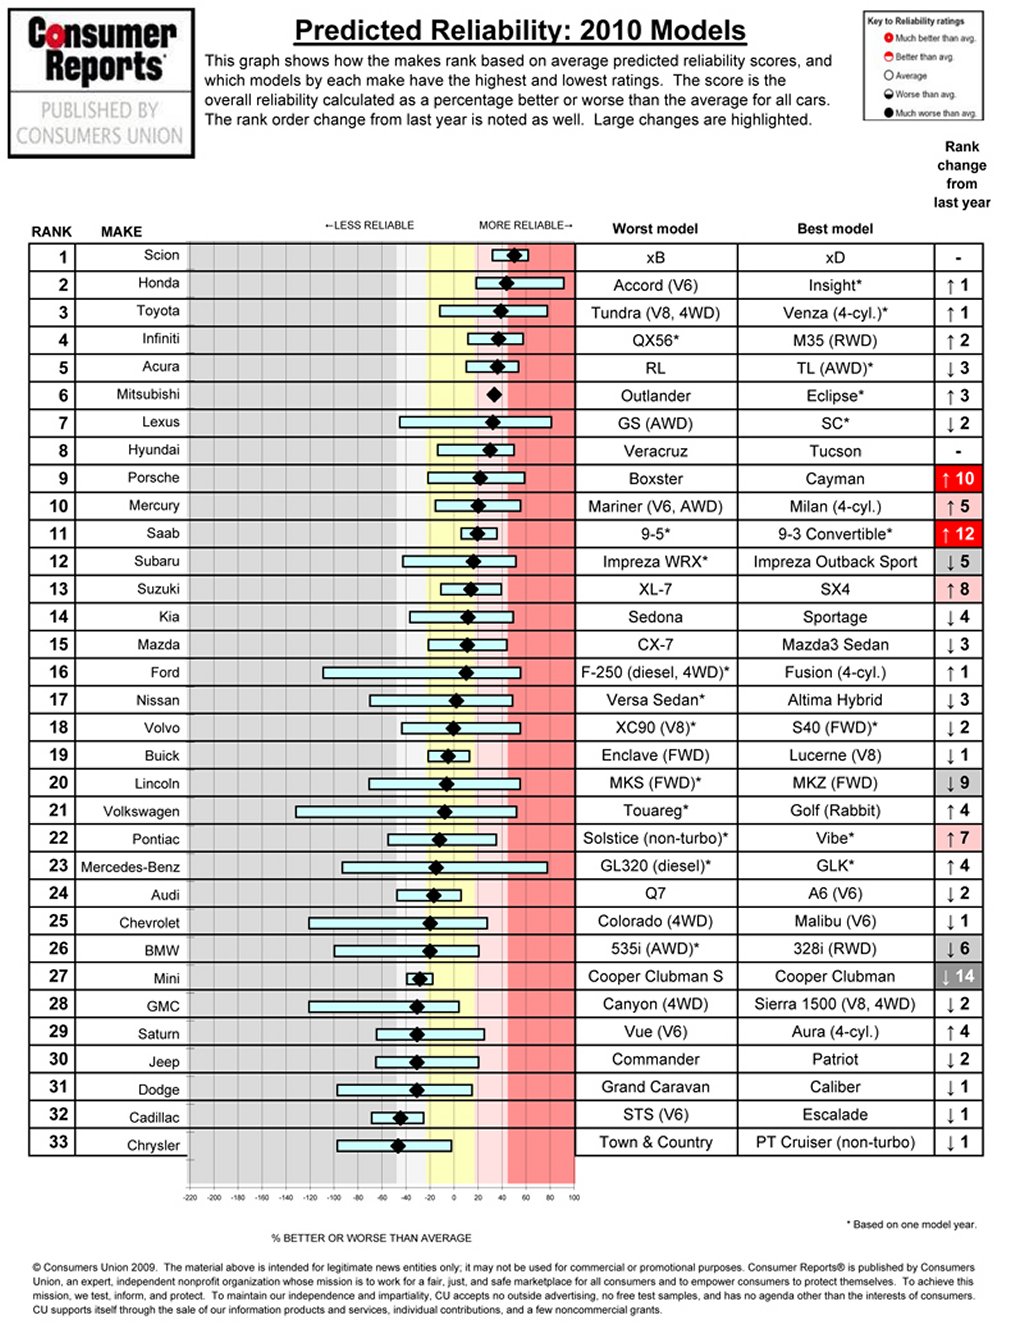 U.S. 2009 reliability report shows Japanese cars leading